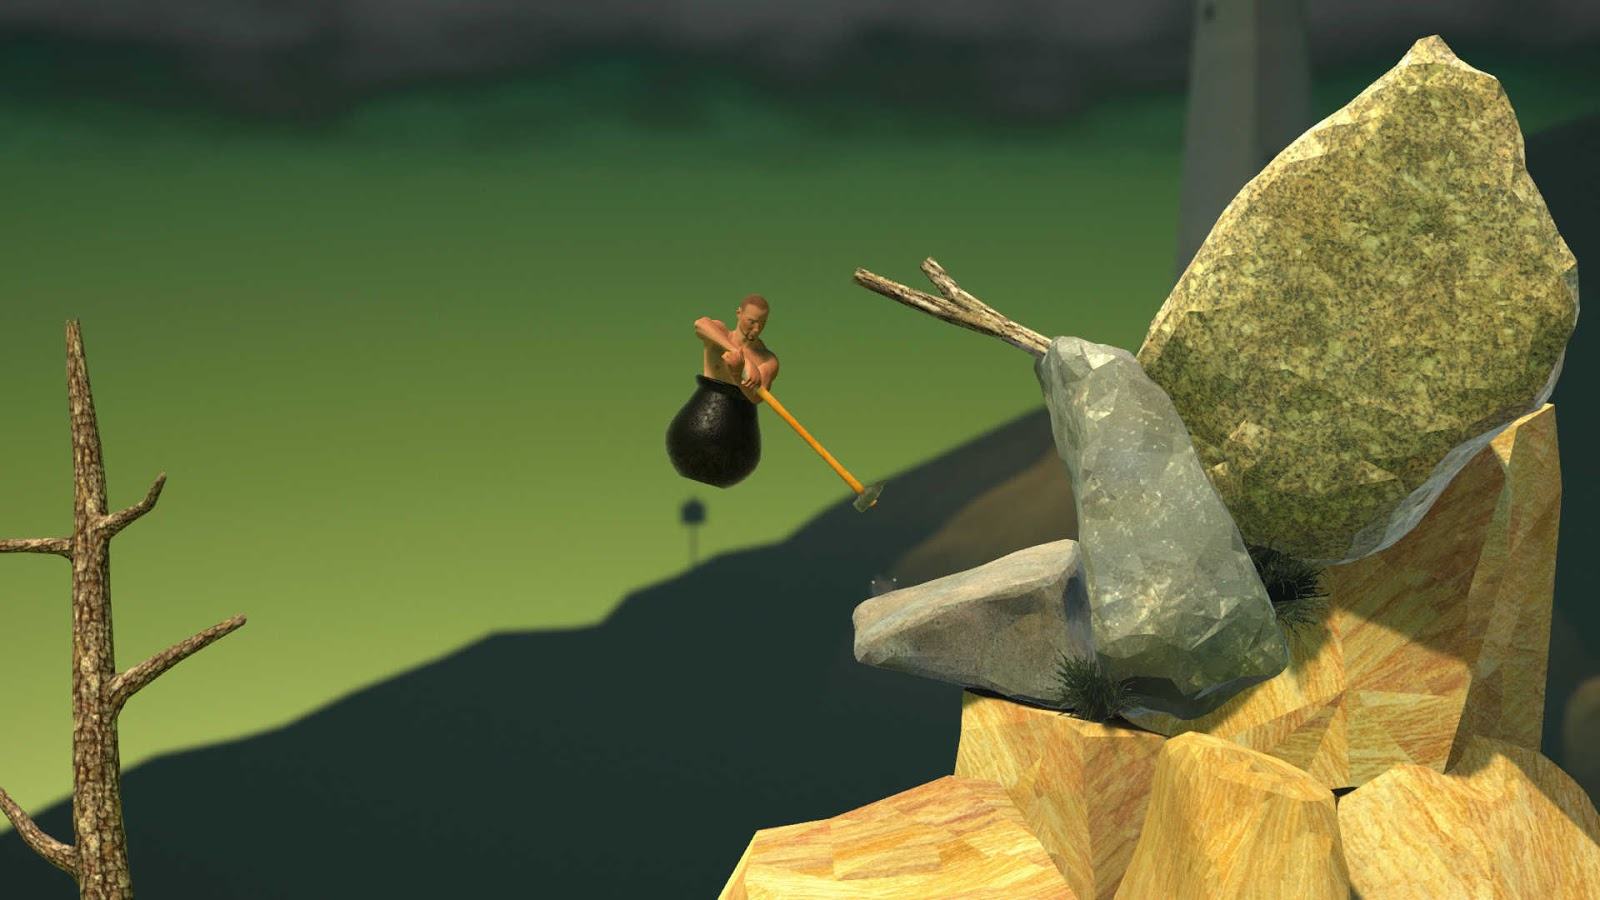 Getting Over It with Bennett Foddy 3